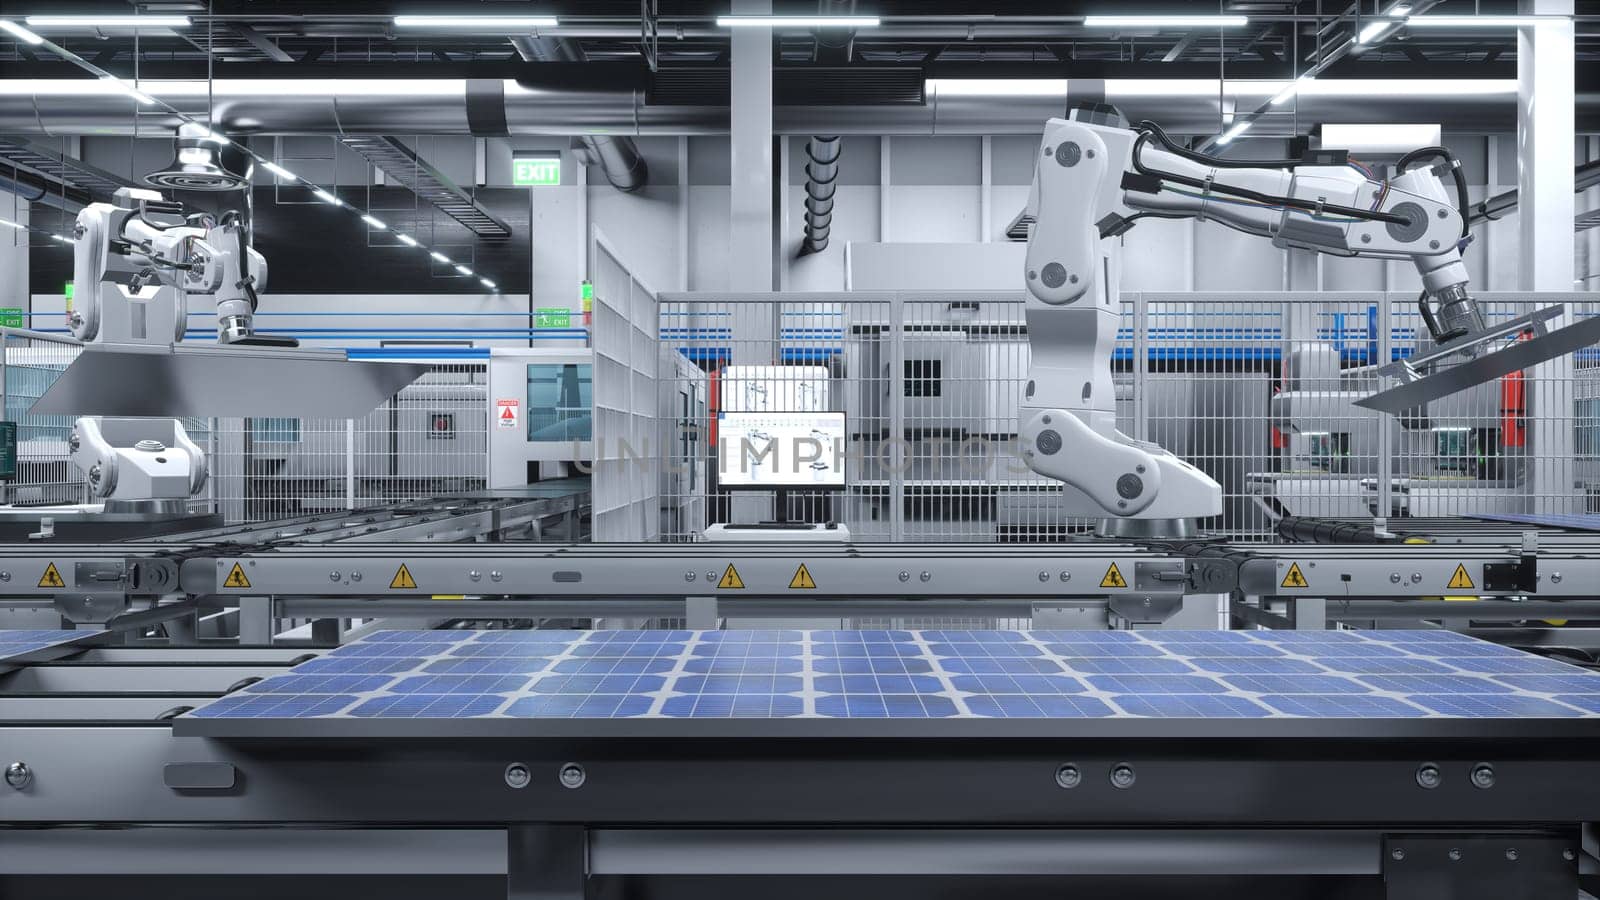 Industrial solar panel warehouse with robot arms placing photovoltaic modules on assembly lines, 3D illustration. Manufacturing facility producing PV models for energy industry